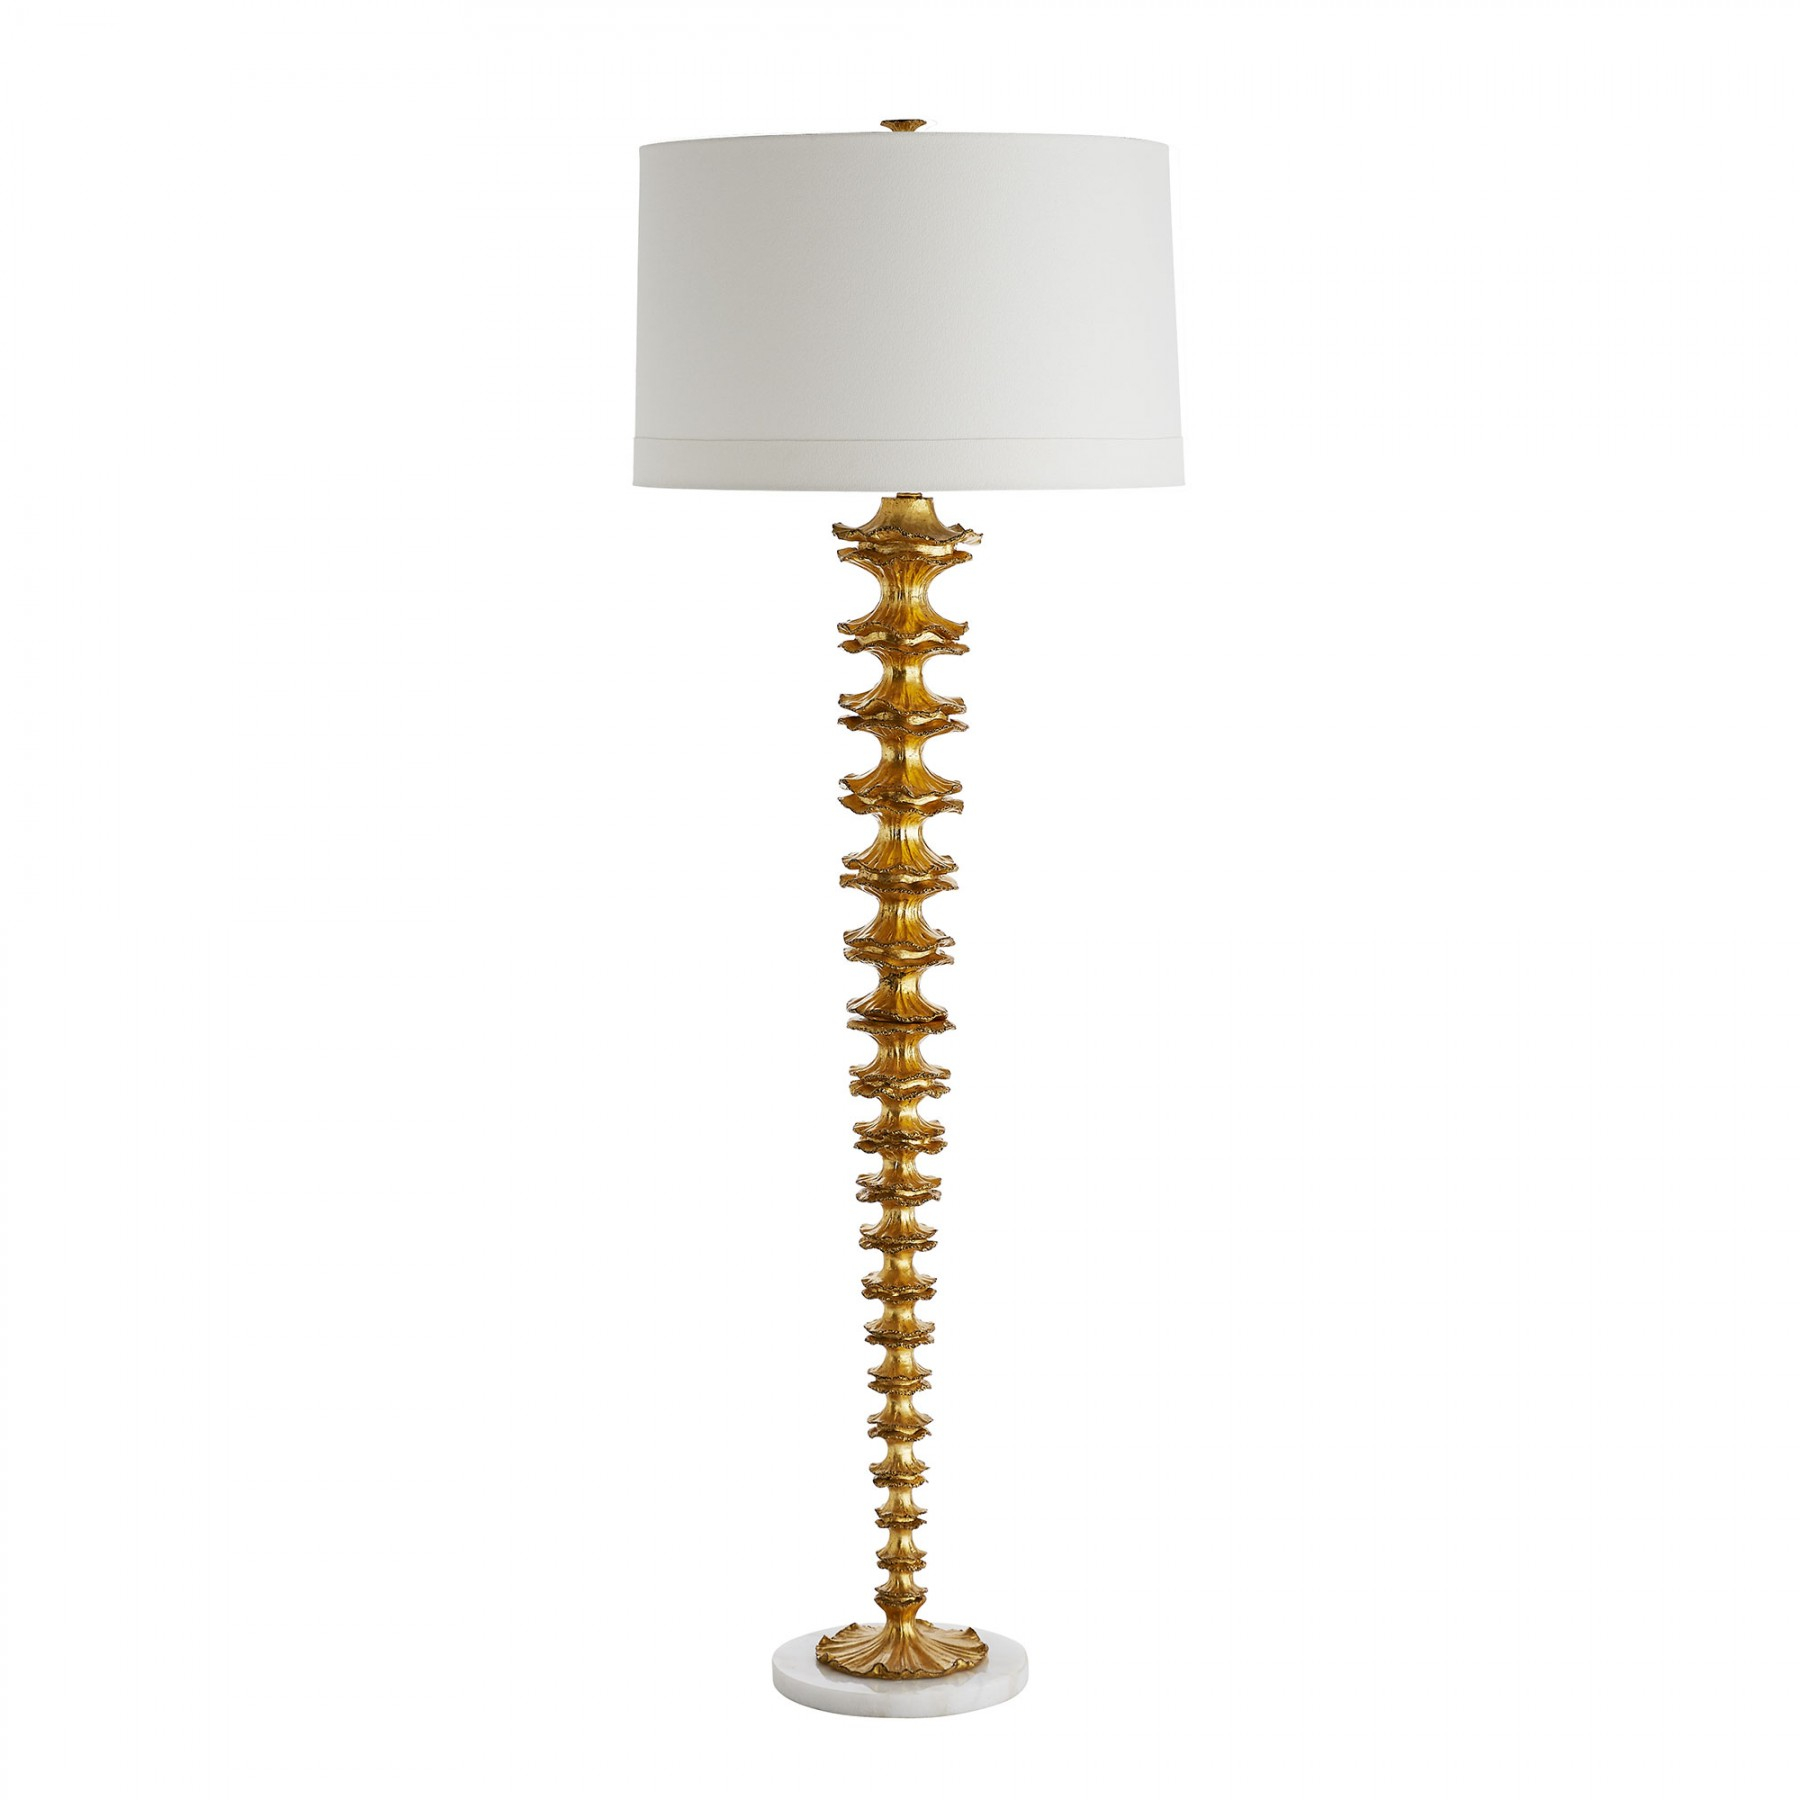 Details About 655 Tall Cilla Floor Lamp Gold Leaf Resin Tapering Disks White Marble Base intended for proportions 1800 X 1800